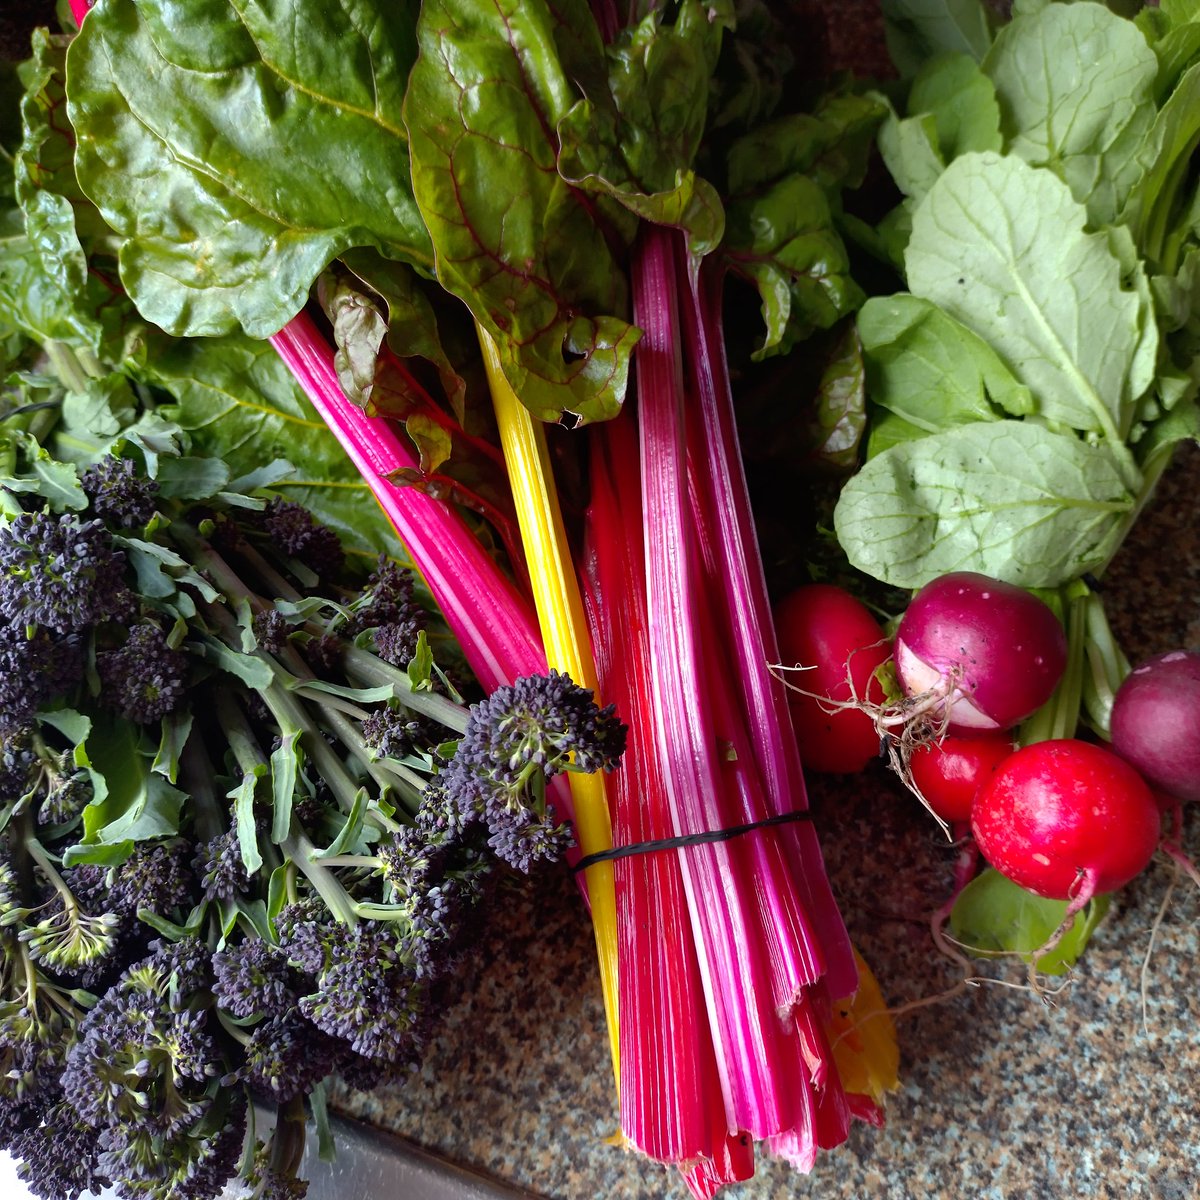 Jackpot at yesterday's farmers market 🥬🩷🥦😋 This is going to be today's dinner 👌🏻 (well, aside from the radishes, which are already gone! 😅). Plus: it was all grown locally, less than 20km from where I live 🤗 
PS. How do you eat swiss chard? 
#vegan #eatyourgreens #goodfood